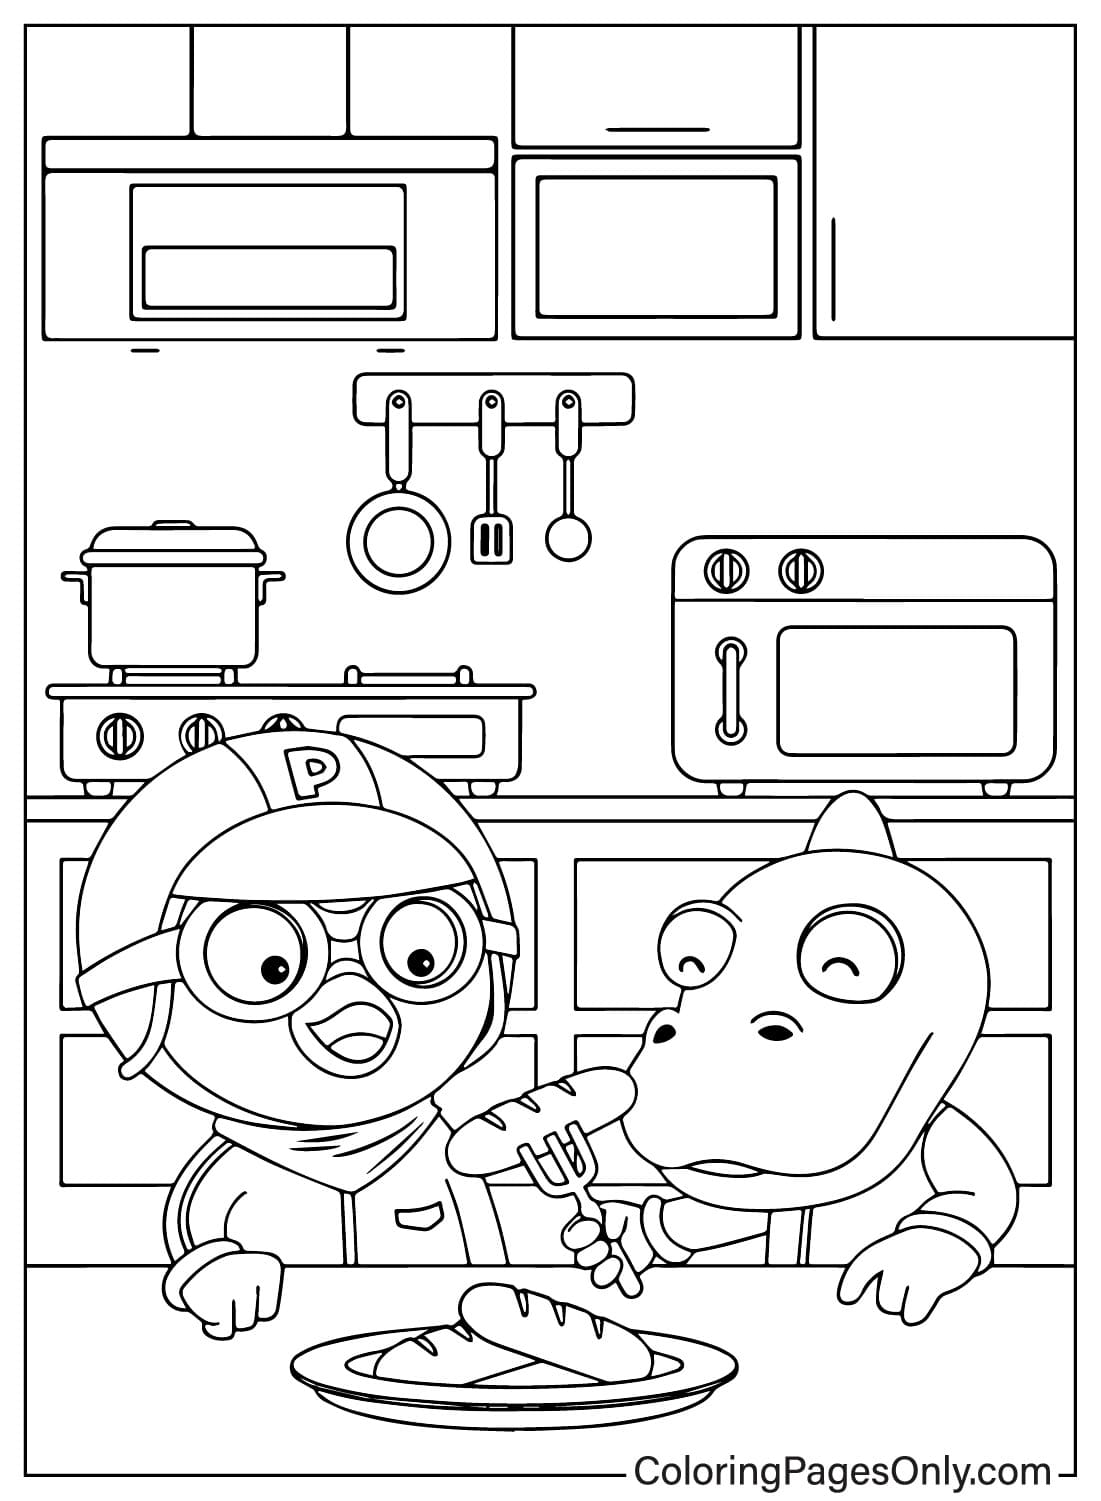 Pororo and Crong Coloring Page from Pororo the Little Penguin